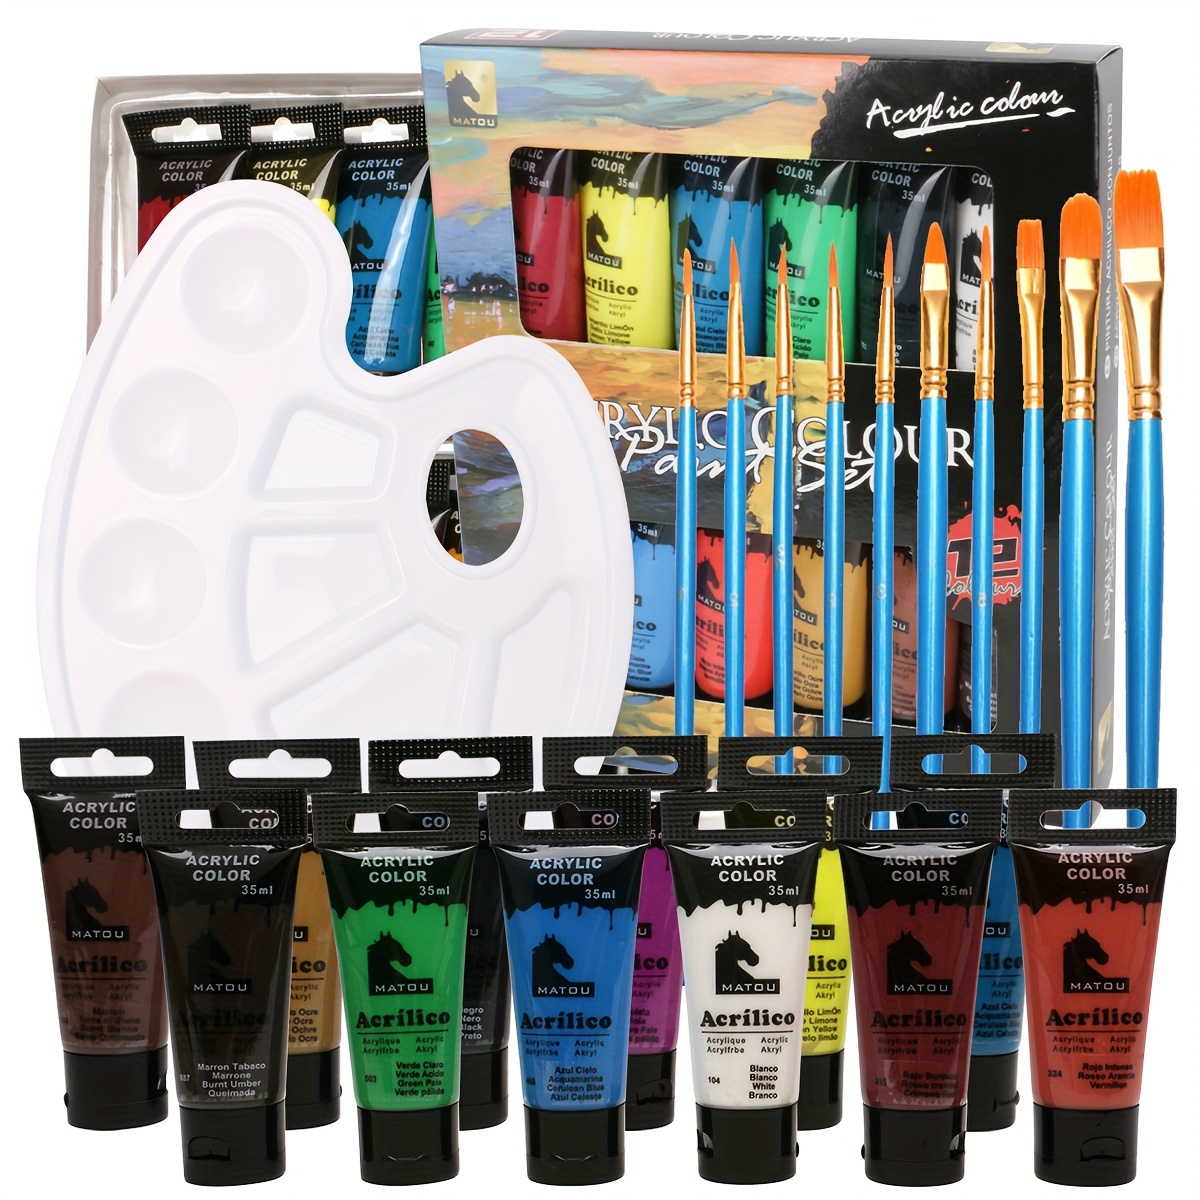 1 2 5 10 Acrylic Paint Sets For Kids Acrylic Pigment Set With 2